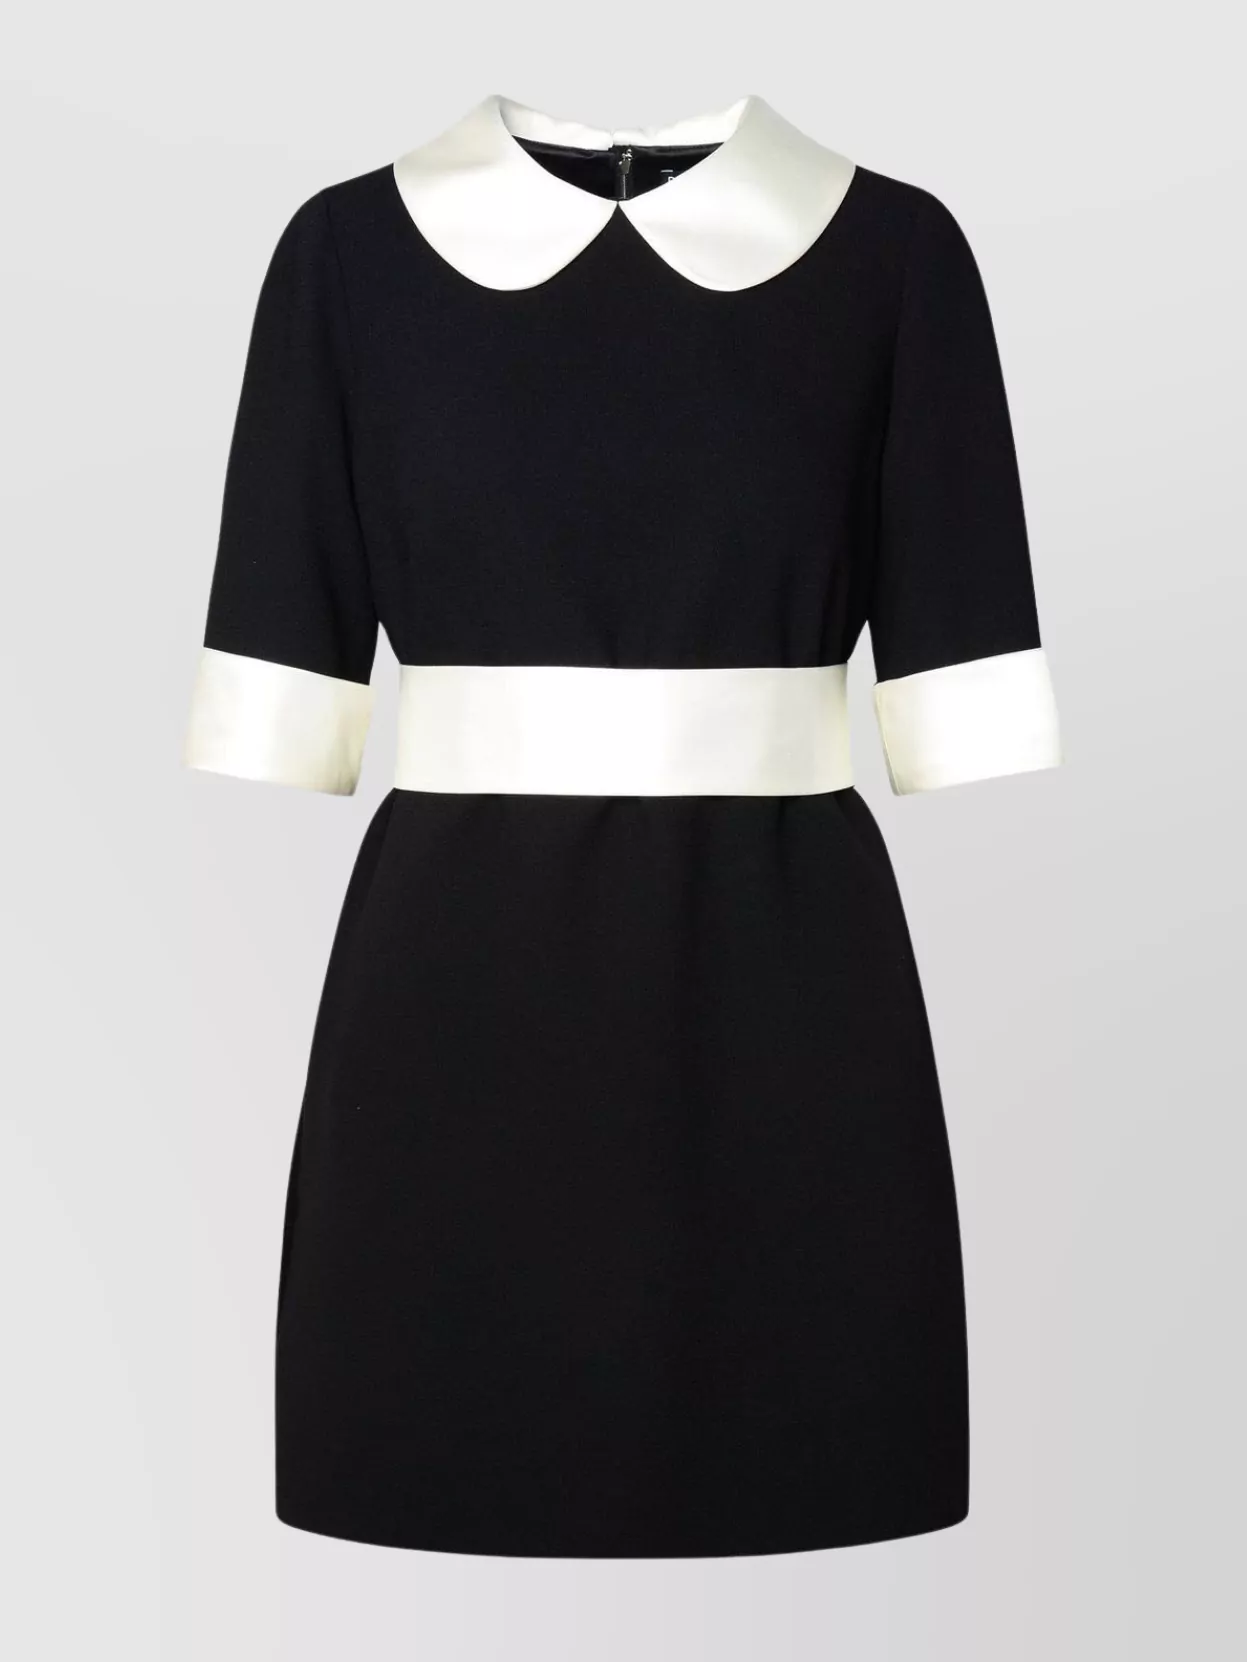 Dolce & Gabbana Wool Blend Dress With Contrast Collar And Cuffs